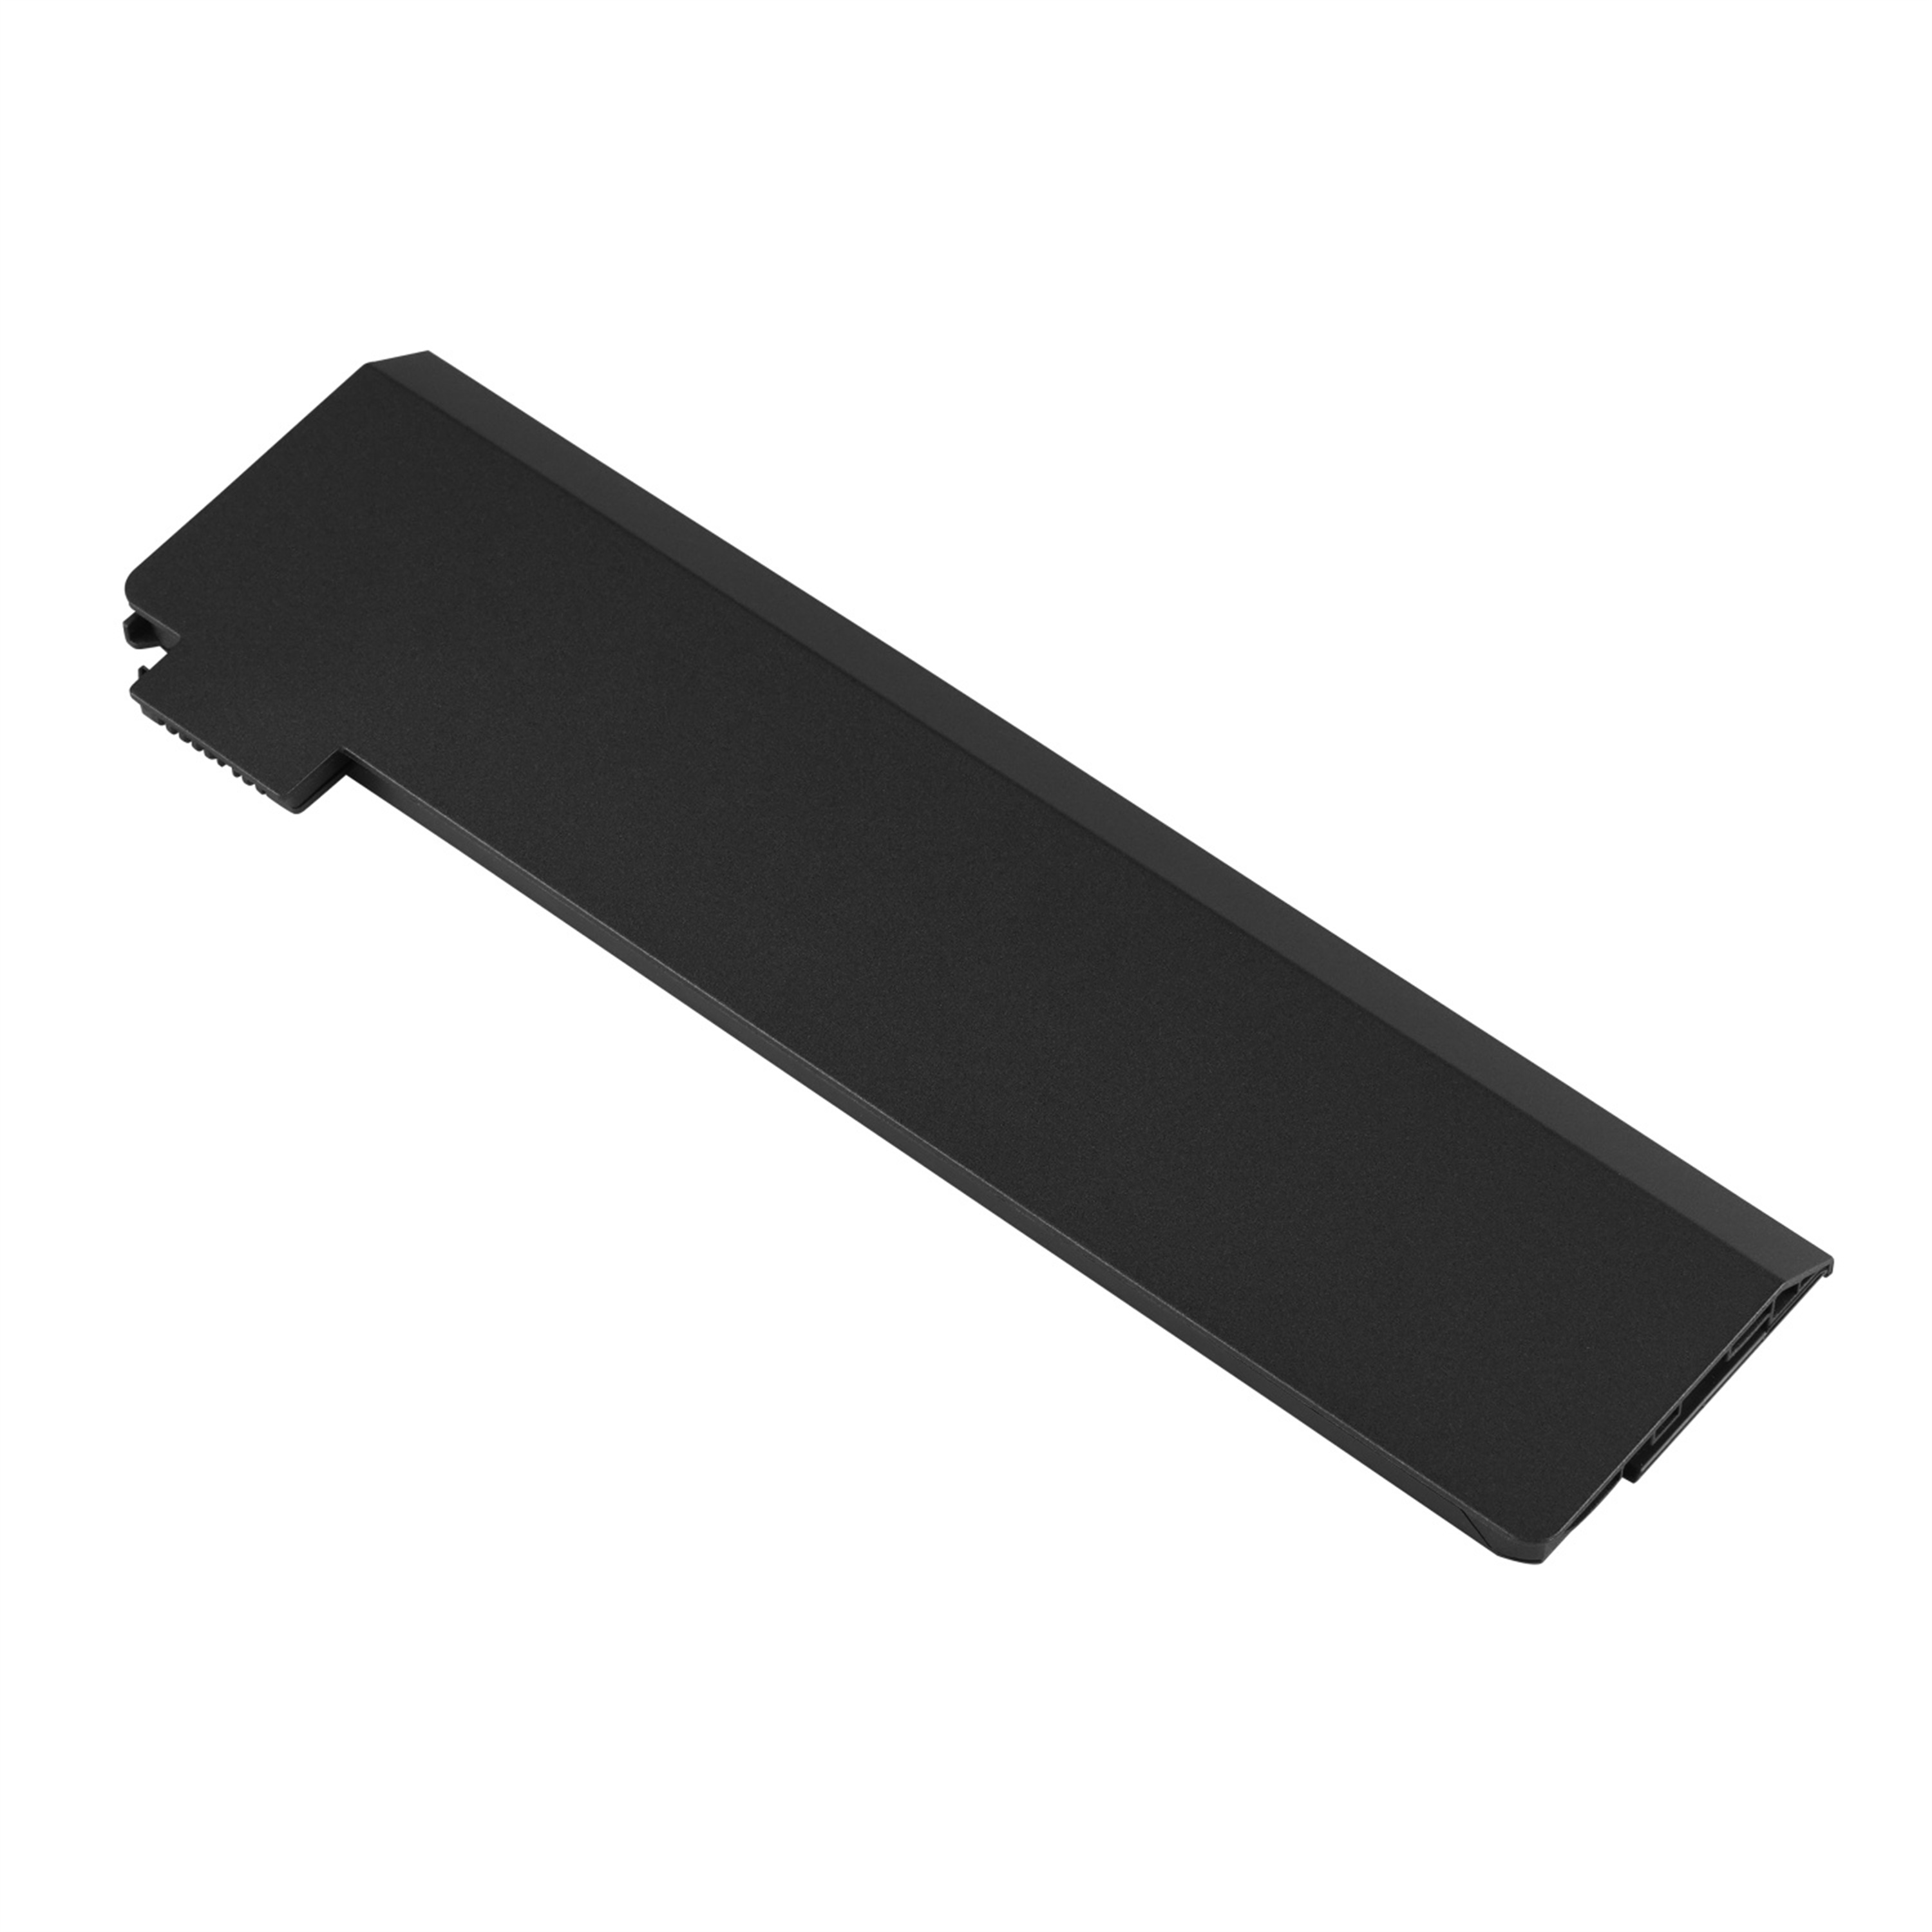 45N1775 rechargeable lithium ion Notebook battery Laptop battery For Lenovo L450 L460 L470 T440s T440 T450 T450s T460 T460P T550, T560, P50S , W550s X240, X250, X260, X270 11.4V 24Wh 2060mAh